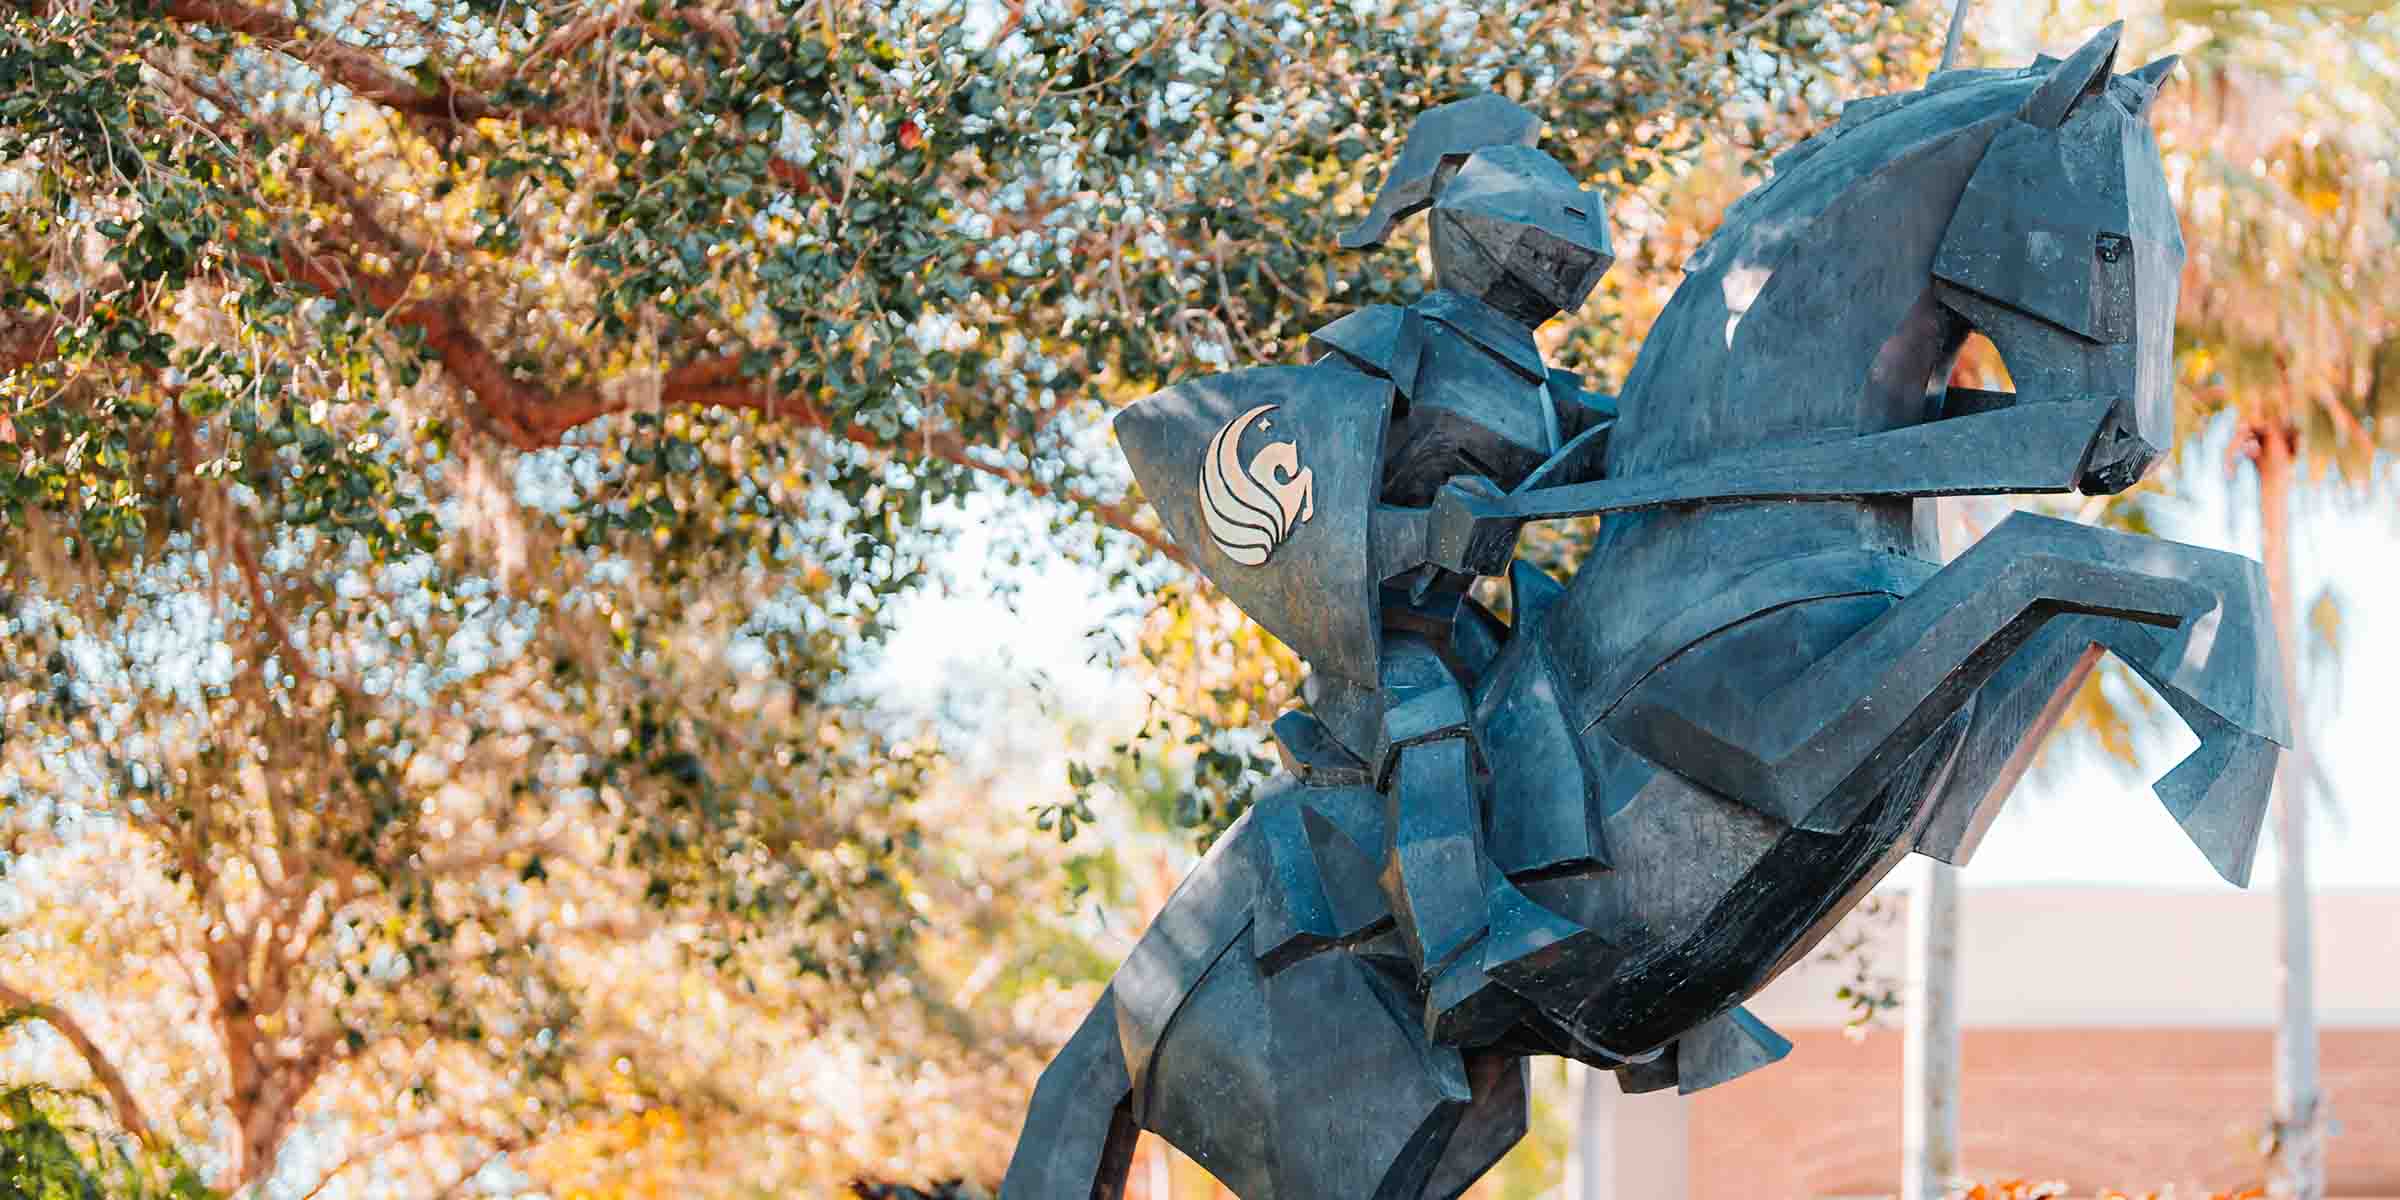 Don Reynolds' statue, "The Charging Knight" located on the campus at UCF